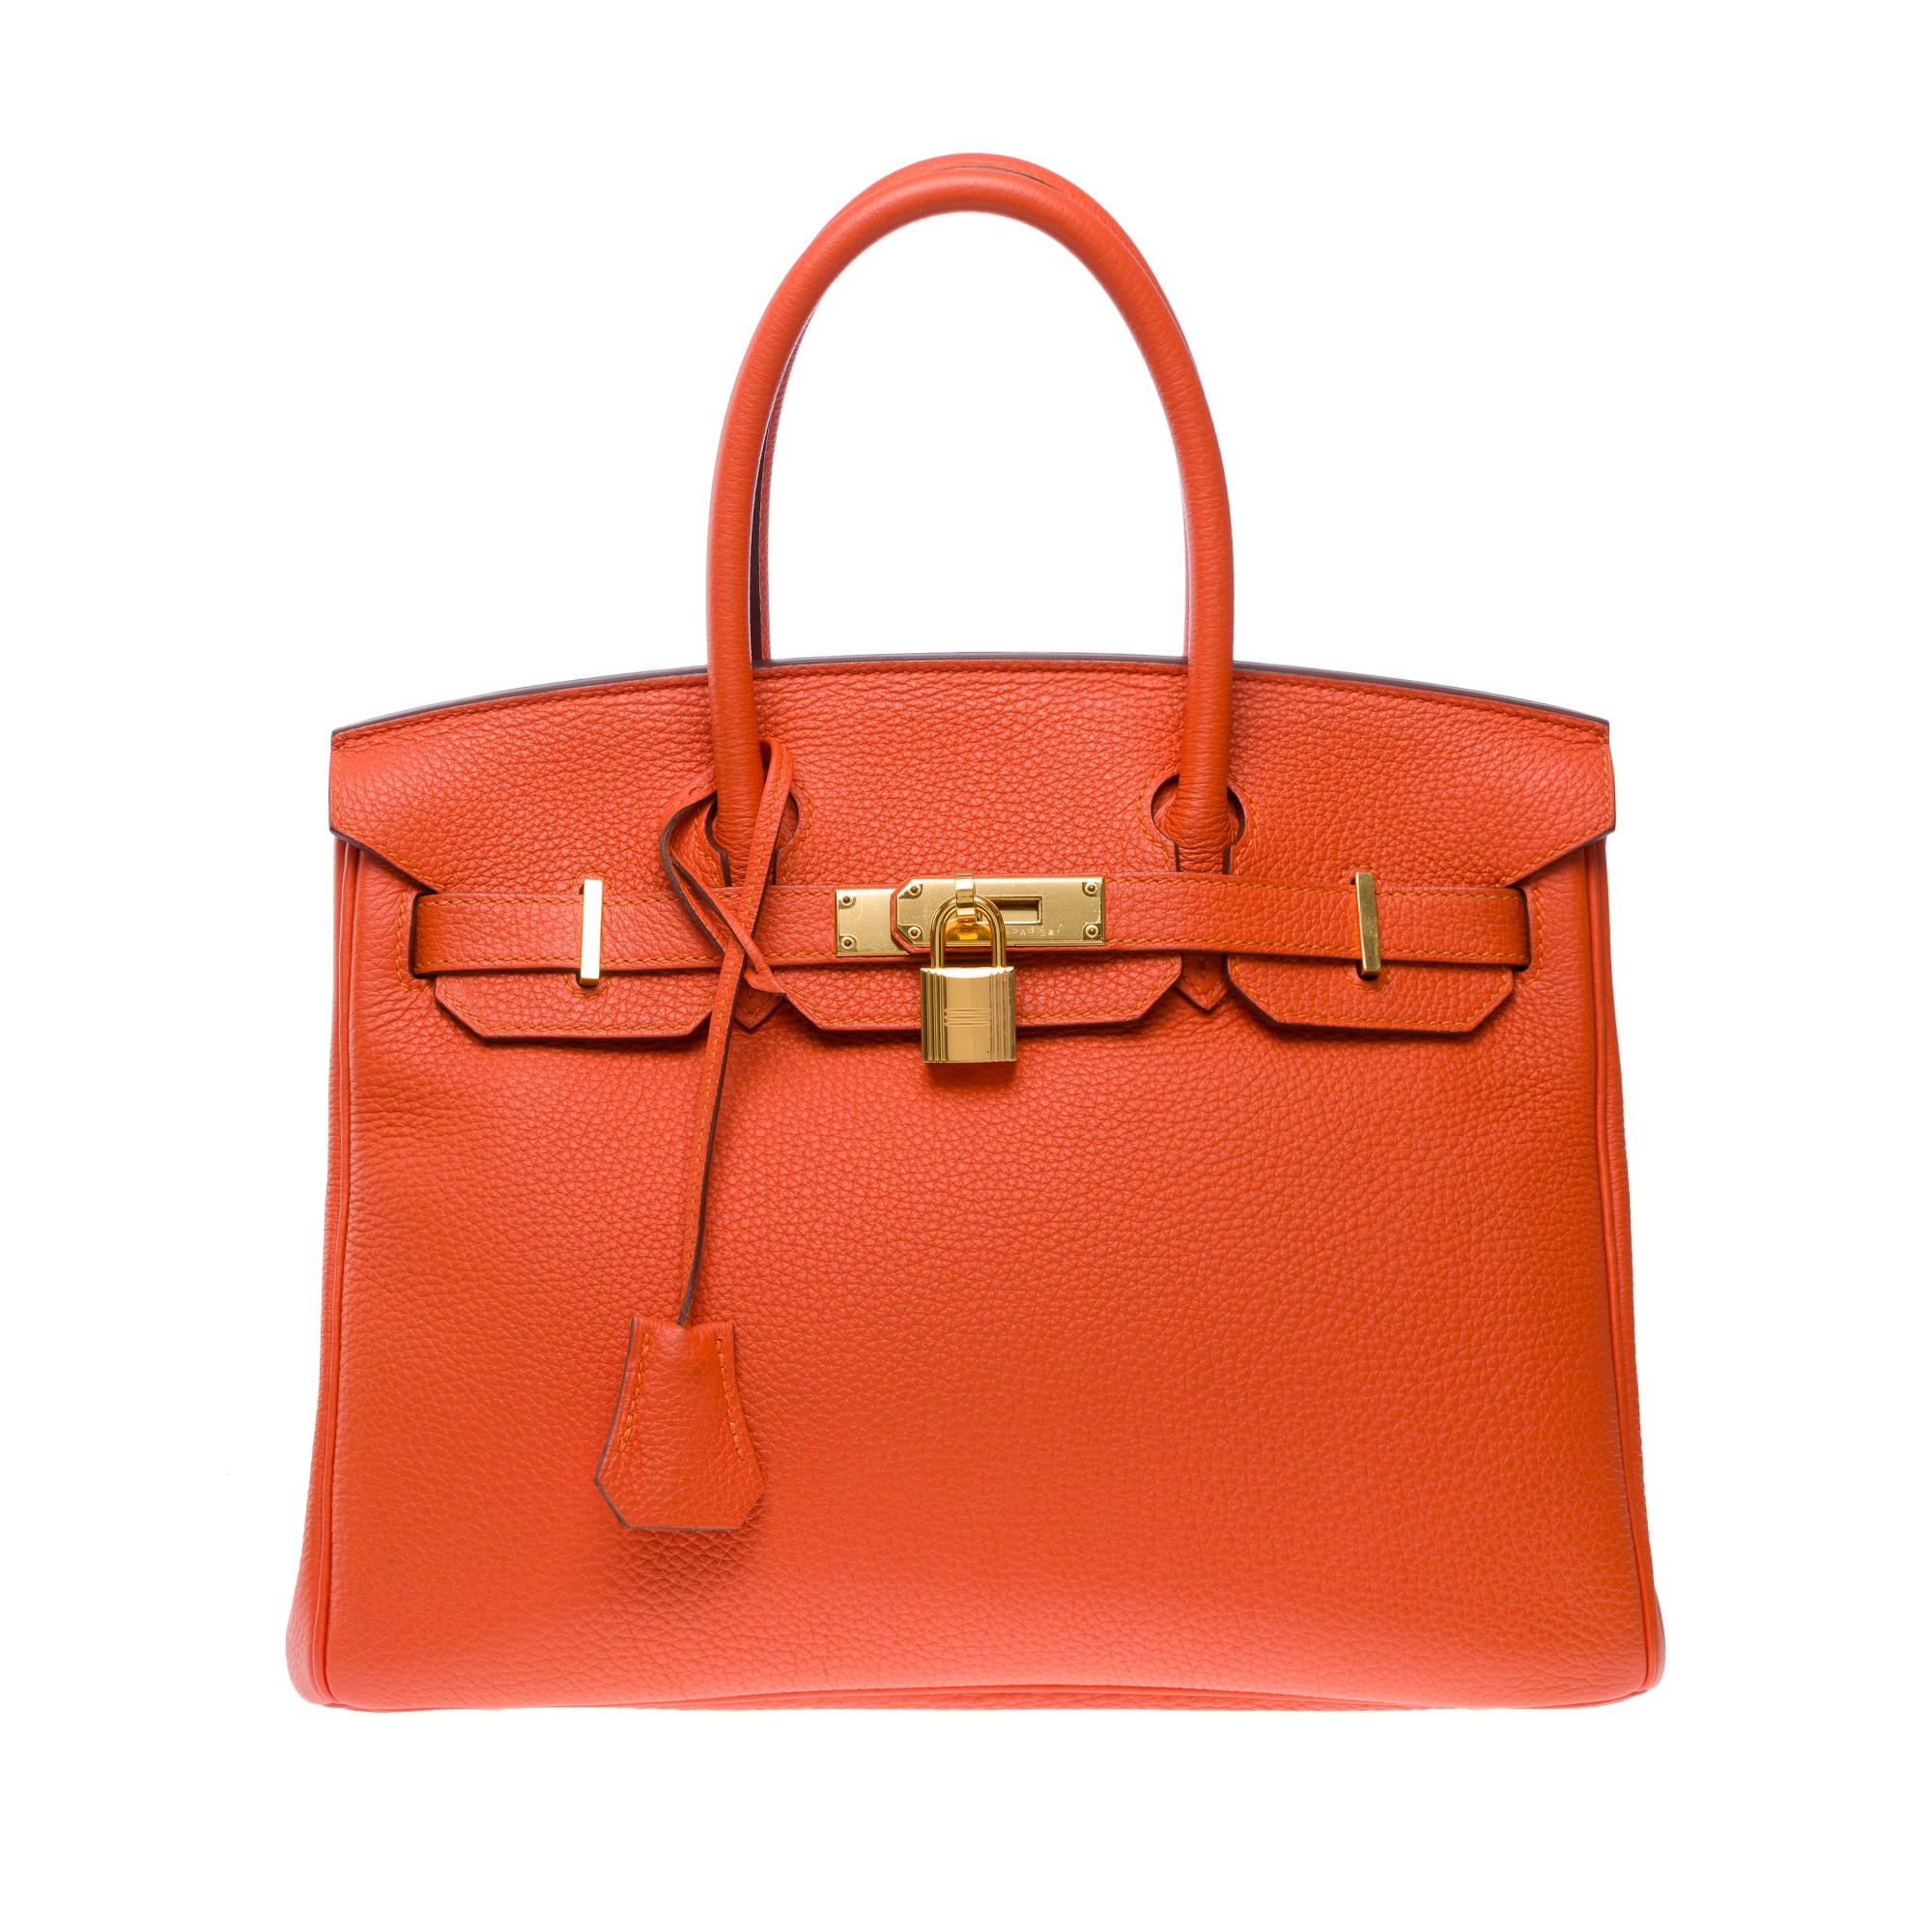 Exceptional​ ​&​ ​luminous​ ​Hermes​ ​Birkin​ ​30​ ​in​ ​Taurillon​ ​leather​ ​Clémence​ ​Orange​ ​Poppy,​ ​gold​ ​plated​ ​metal​ ​trim,​ ​double​ ​handle​ ​in​ ​orange​ ​leather​ ​allowing​ ​a​ ​hand​ ​carry

Flap​ ​closure
Orange​ ​leather​